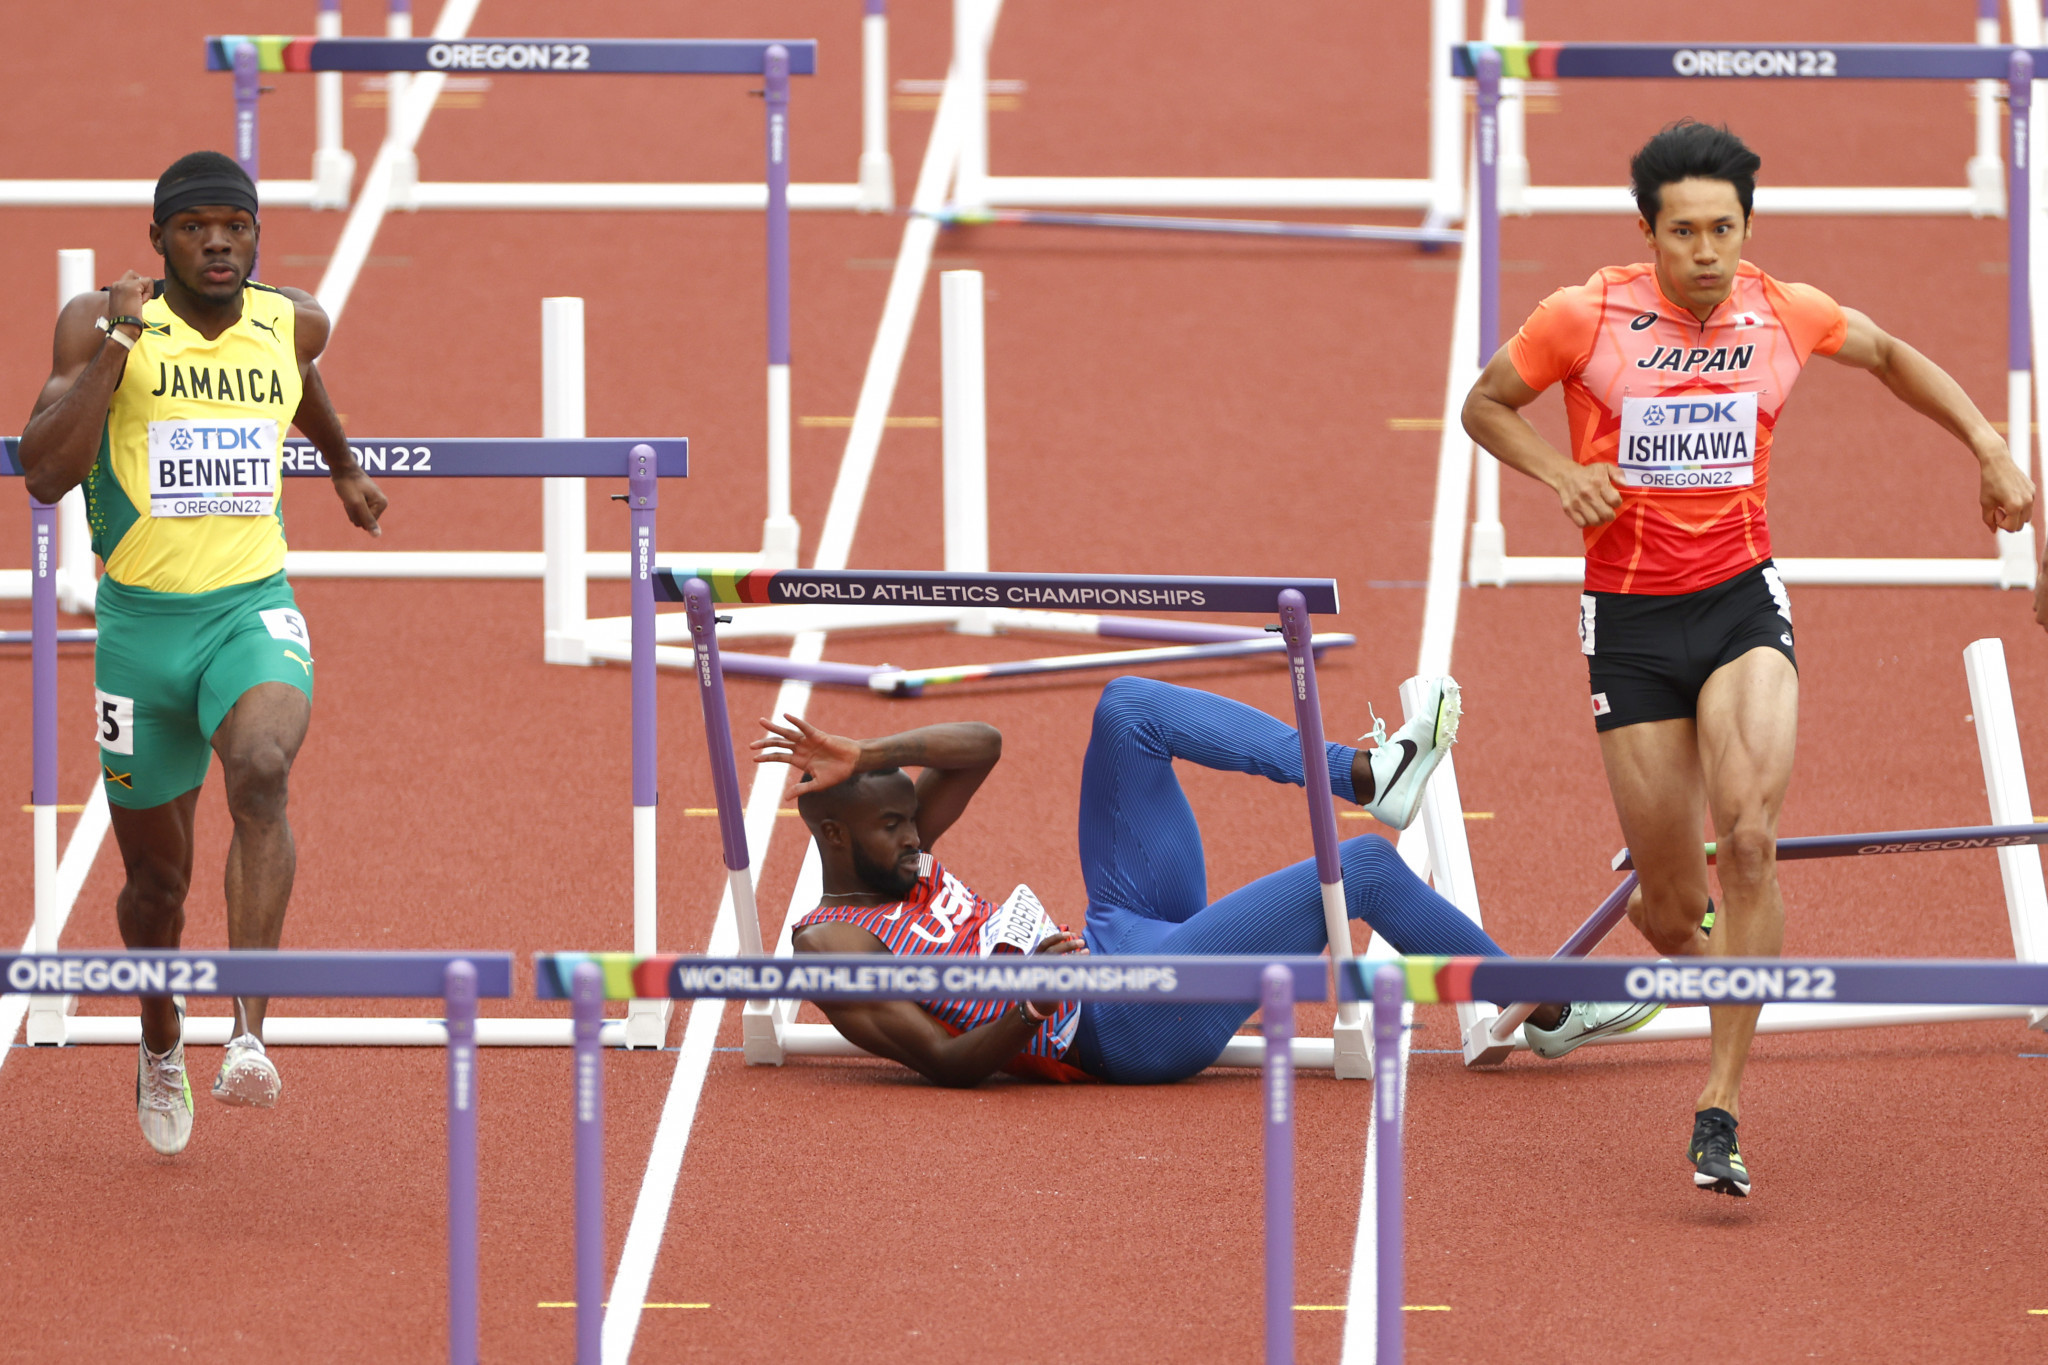 Daniel Roberts, the United States 110m hurdles champion, was disqualified for the second World Athletics Championships after falling at the seventh barrier ©Getty Images